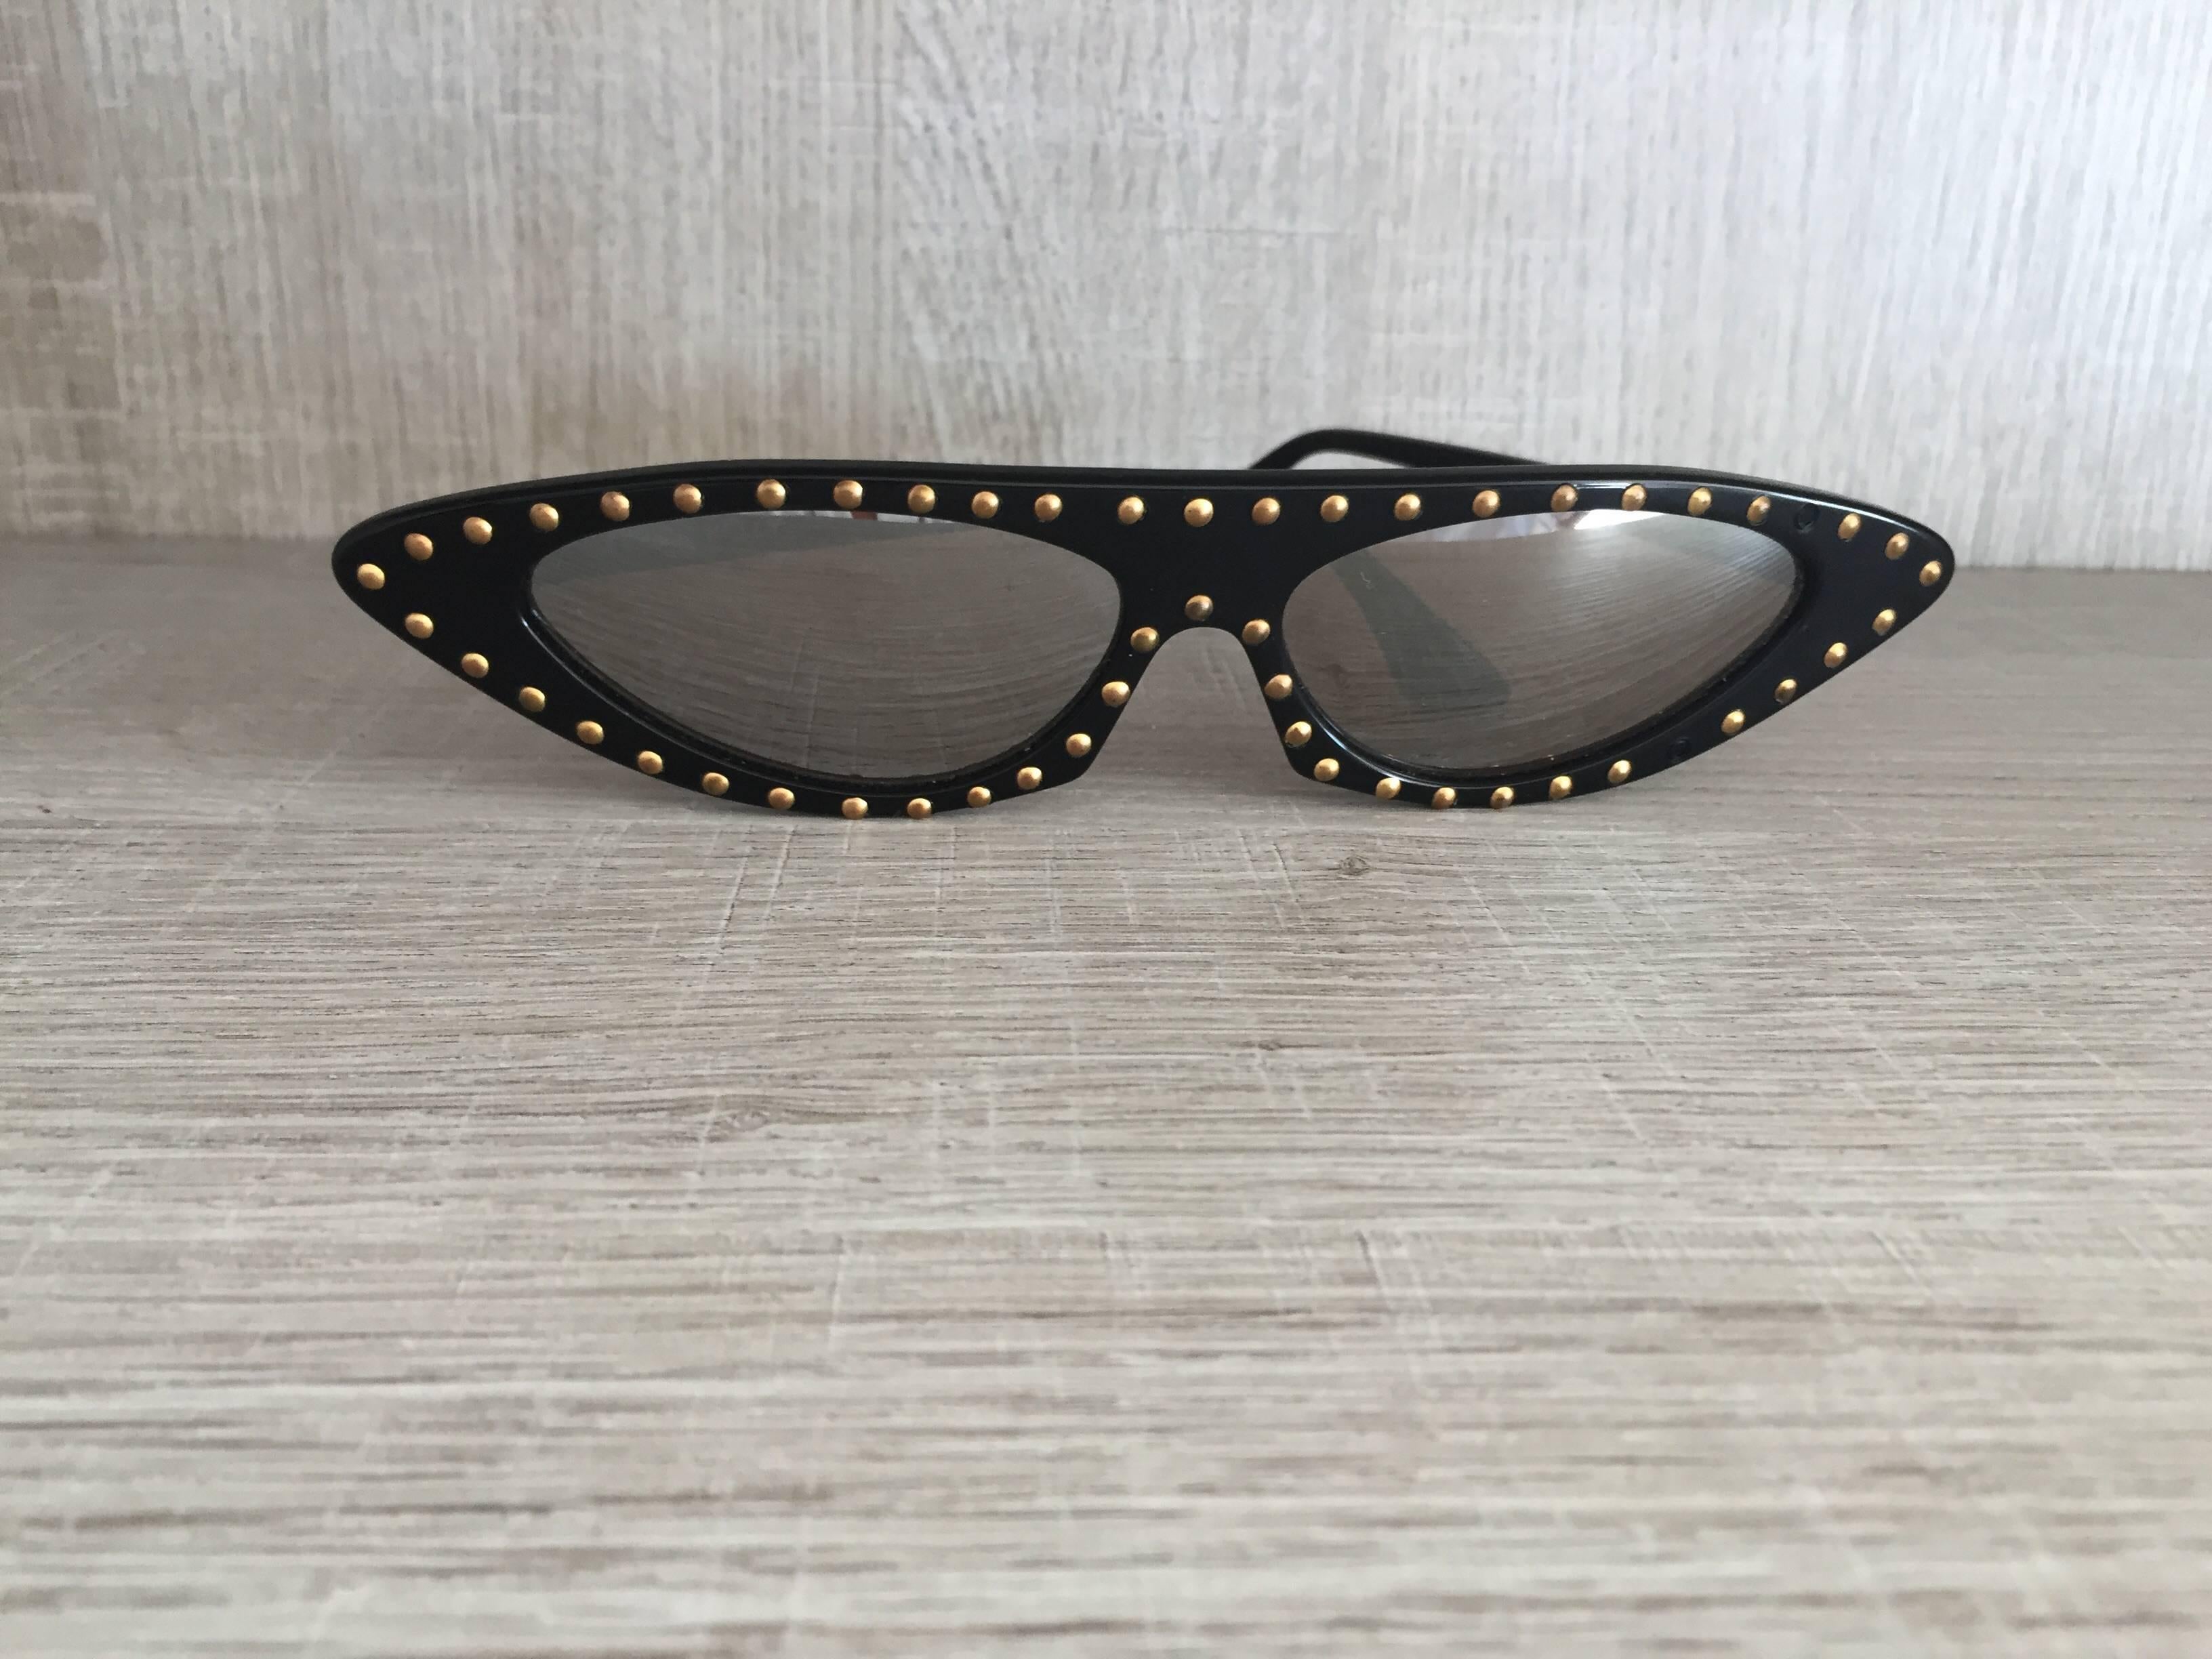 Extremely RARE vintage Patrick Kelly cat eye sunglasses! Encrusted with studs around frames. Patrick Kelly's career was cut short by his untimely death, making his pieces incredibley rare, and super hard to come by! I have a handfull of his dresses